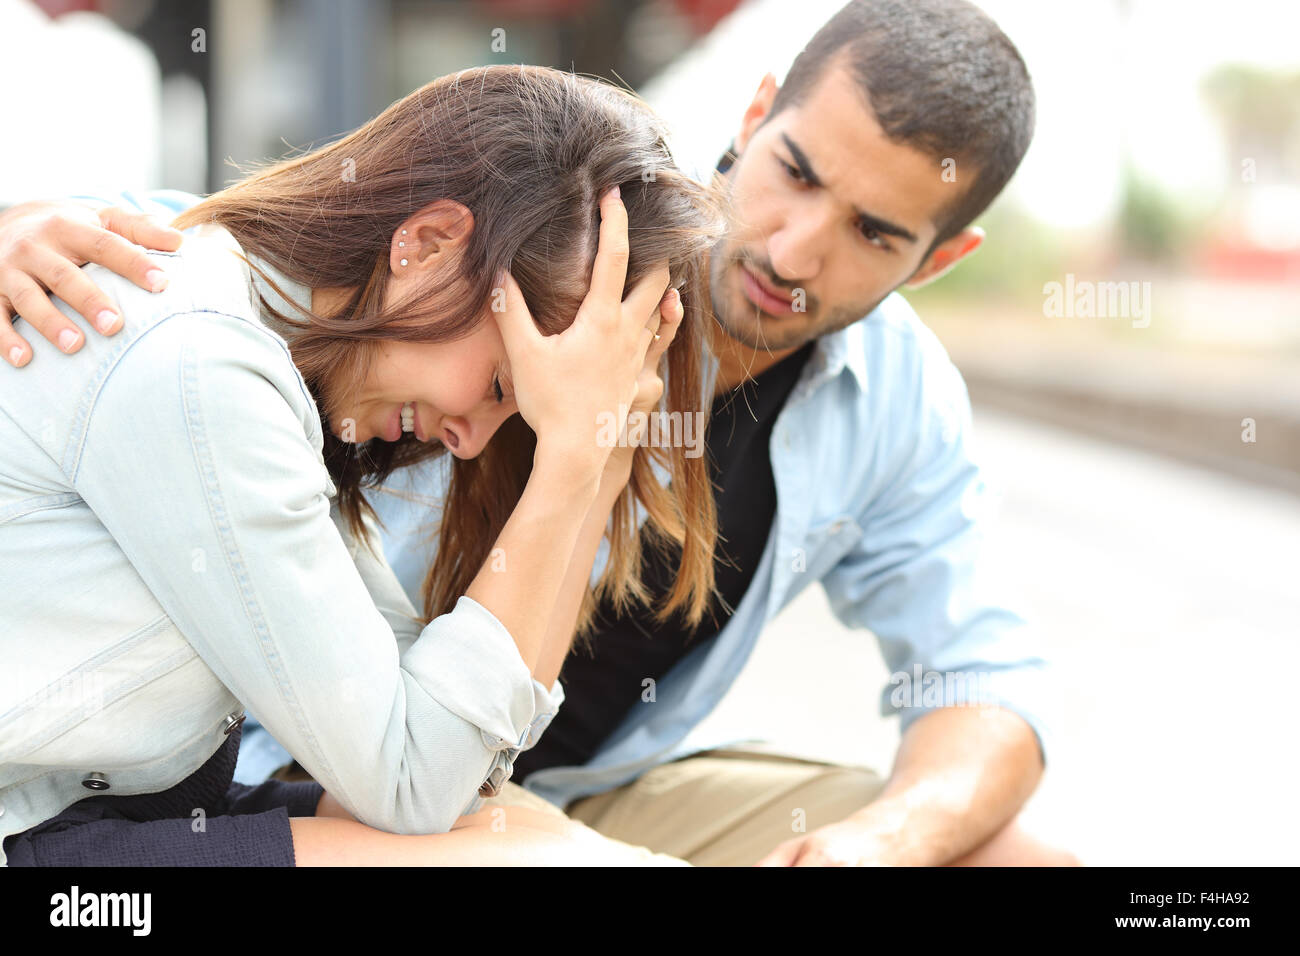 Side view of a muslim man comforting a sad caucasian girl mourning in a train station Stock Photo